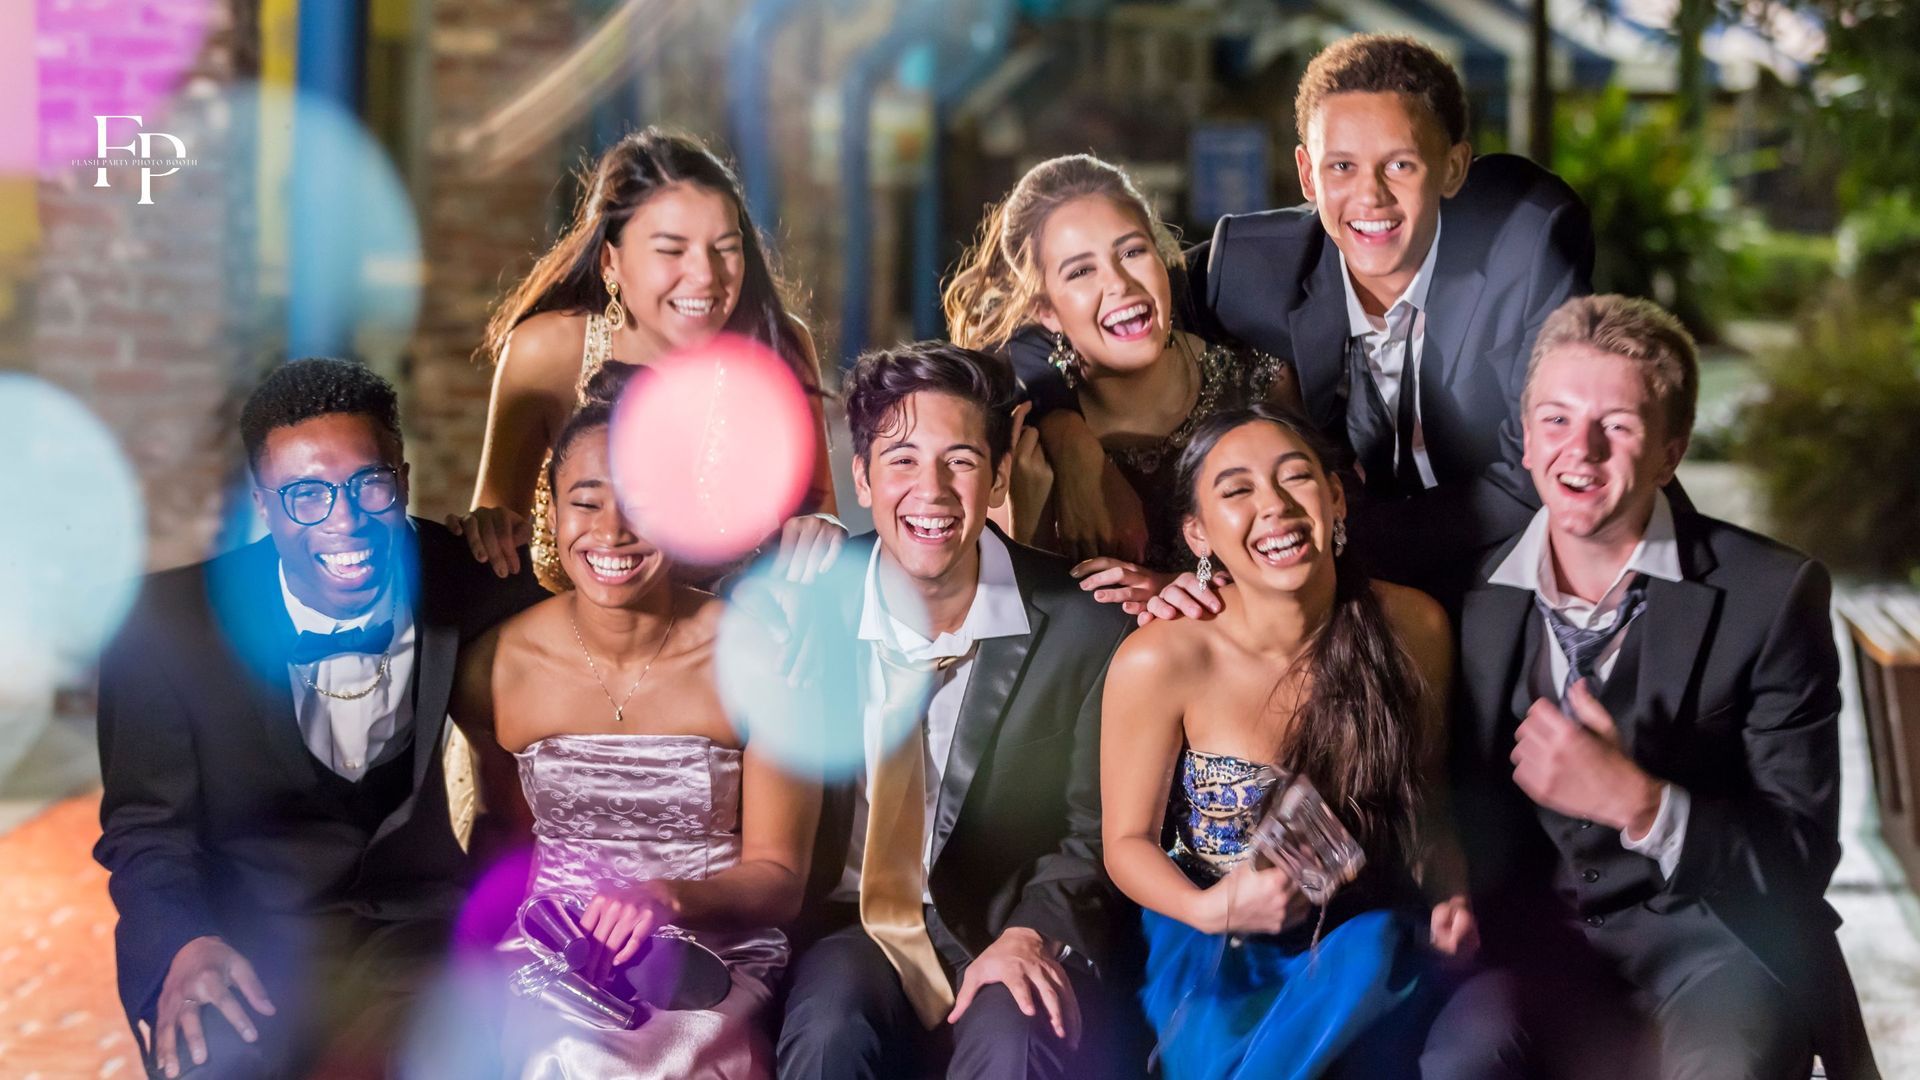 Friends strike poses in the lively flash party photo booth during San Antonio prom